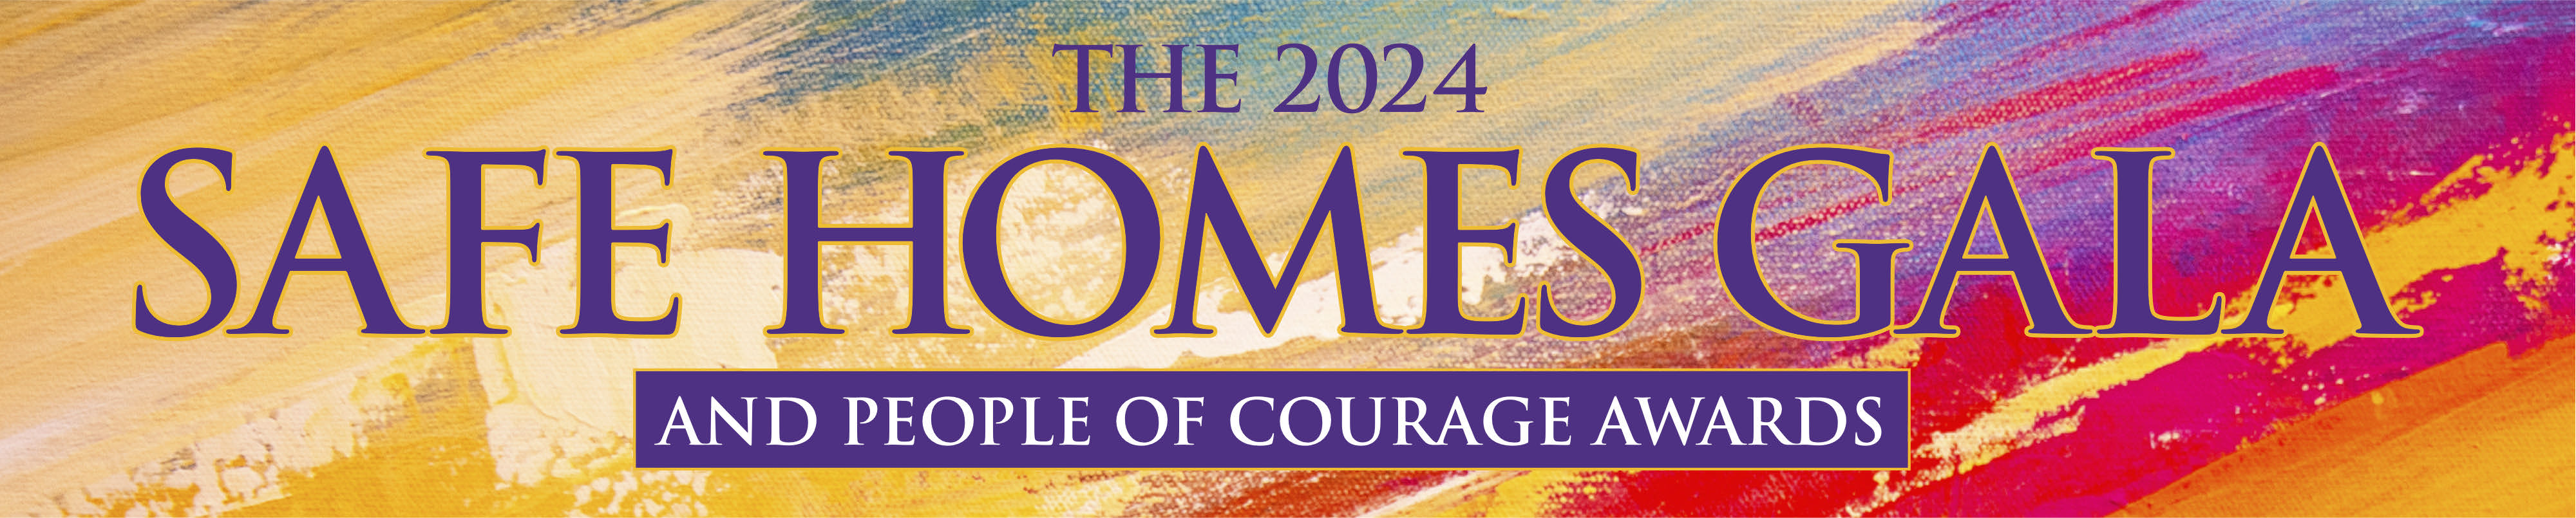 Multicolor sunset background in watercolor texture with purple text "The 2024 Safe Homes Gala and People of Courage Awards"